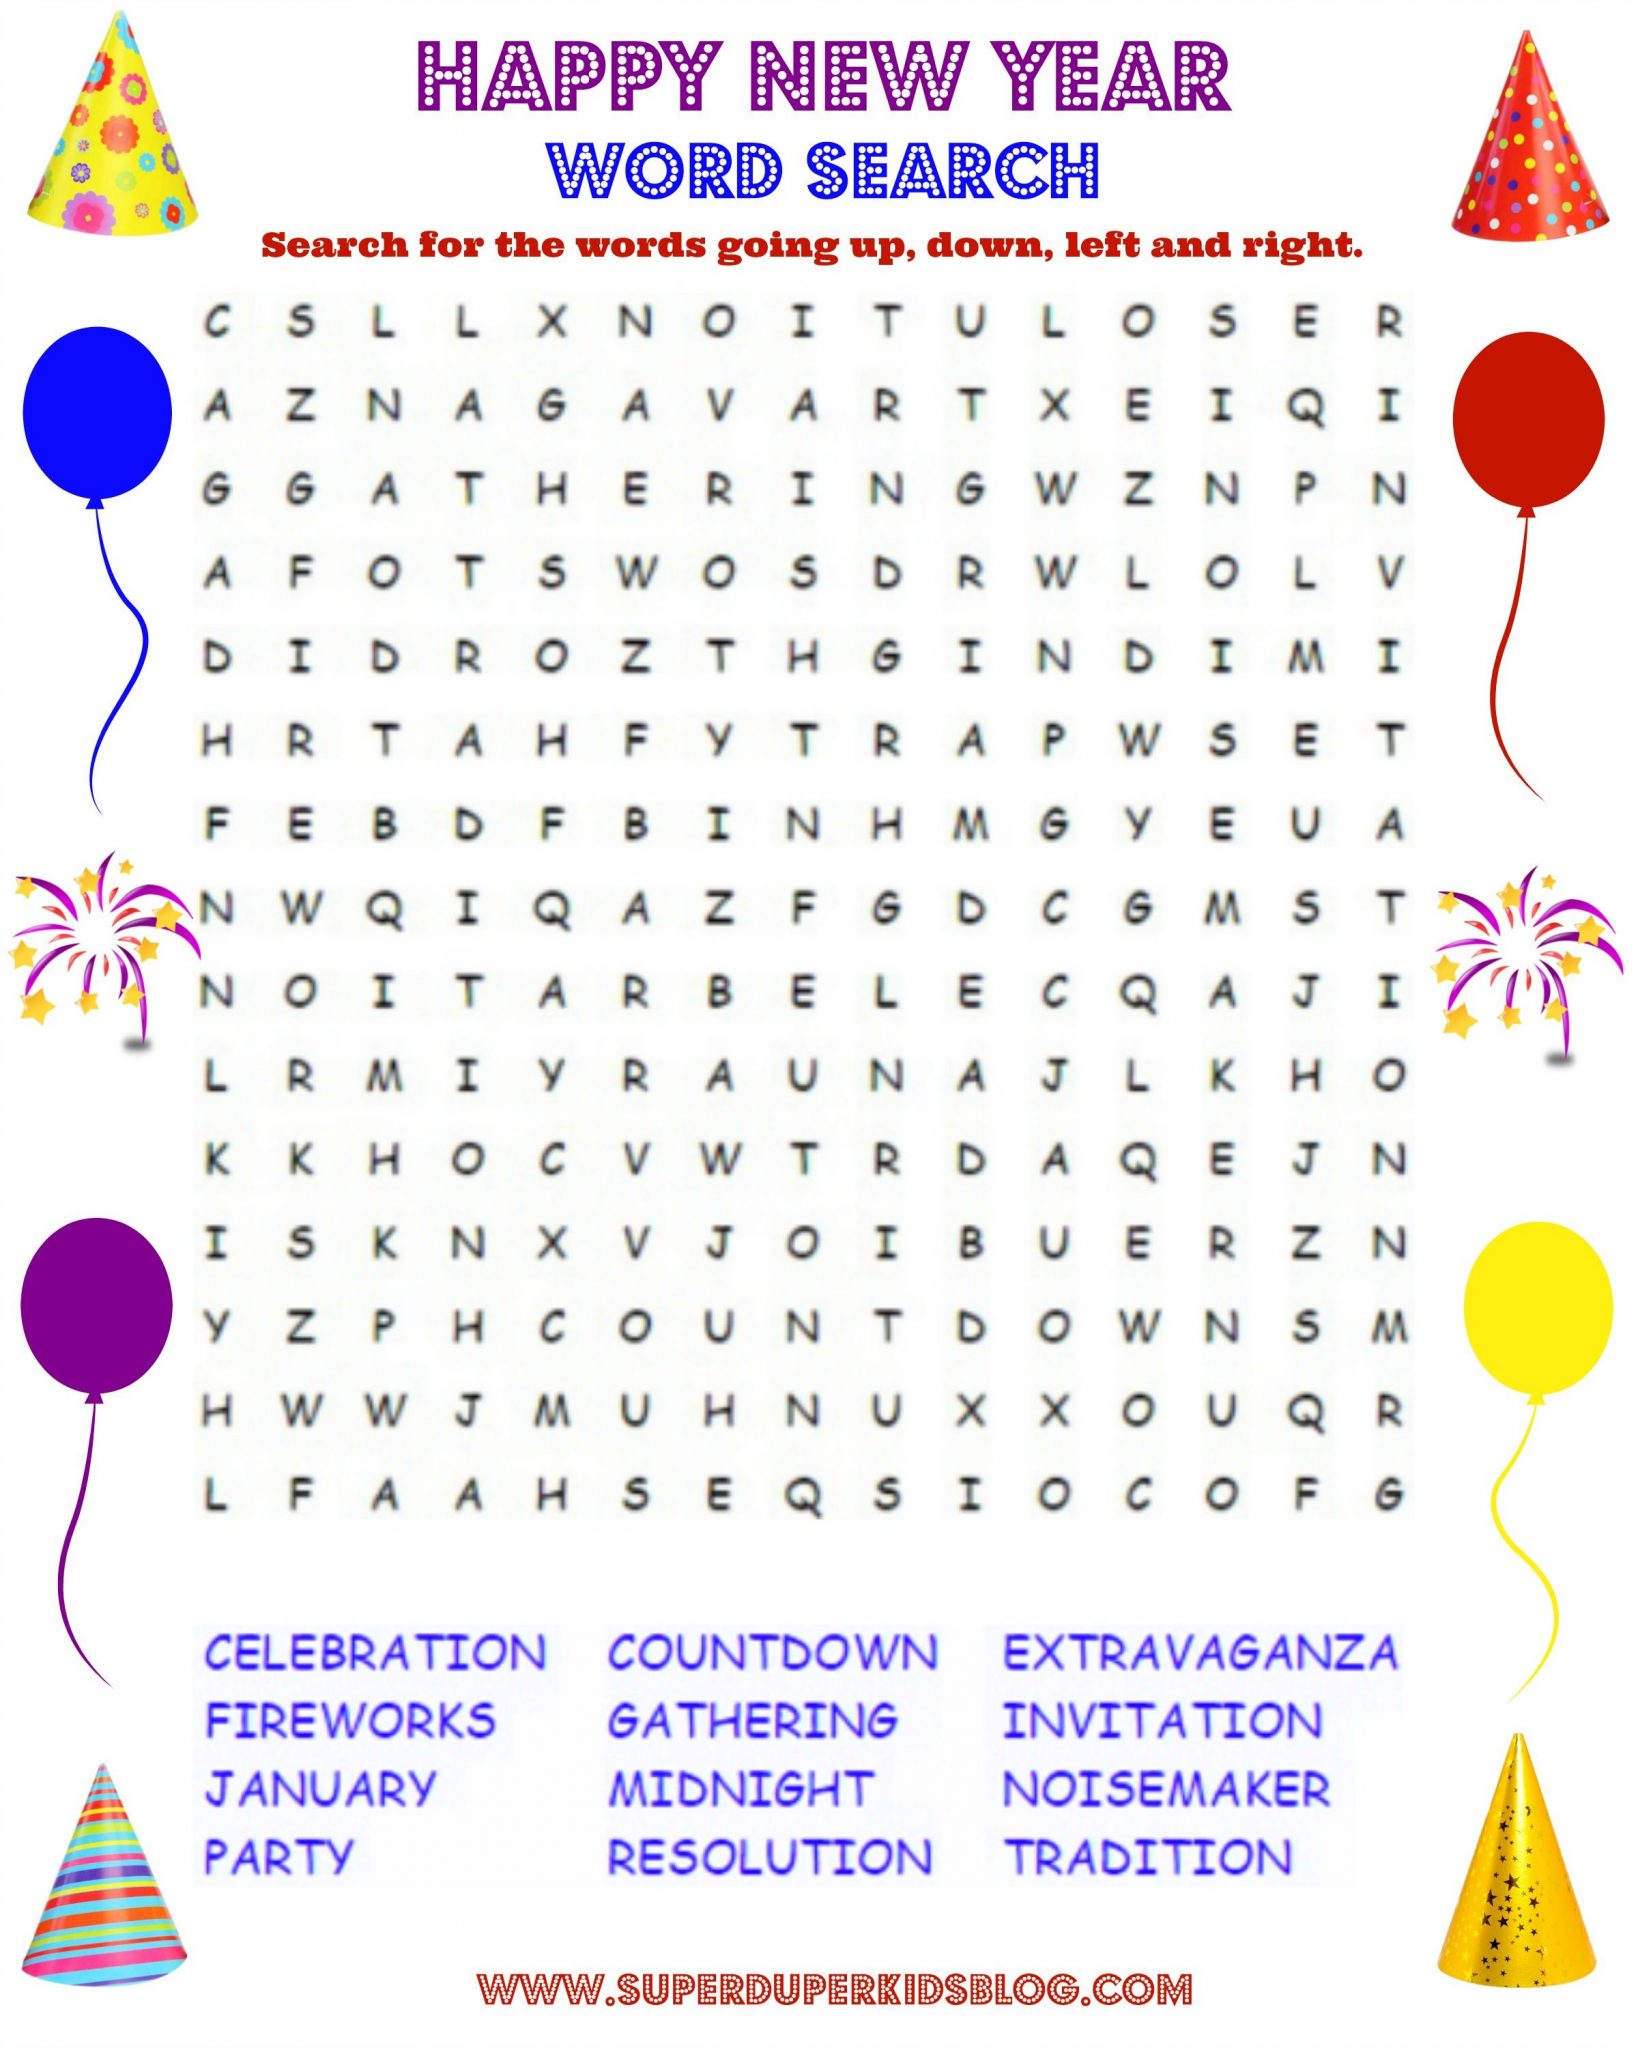 22 Joyous New Years Word Searches KittyBabyLove com